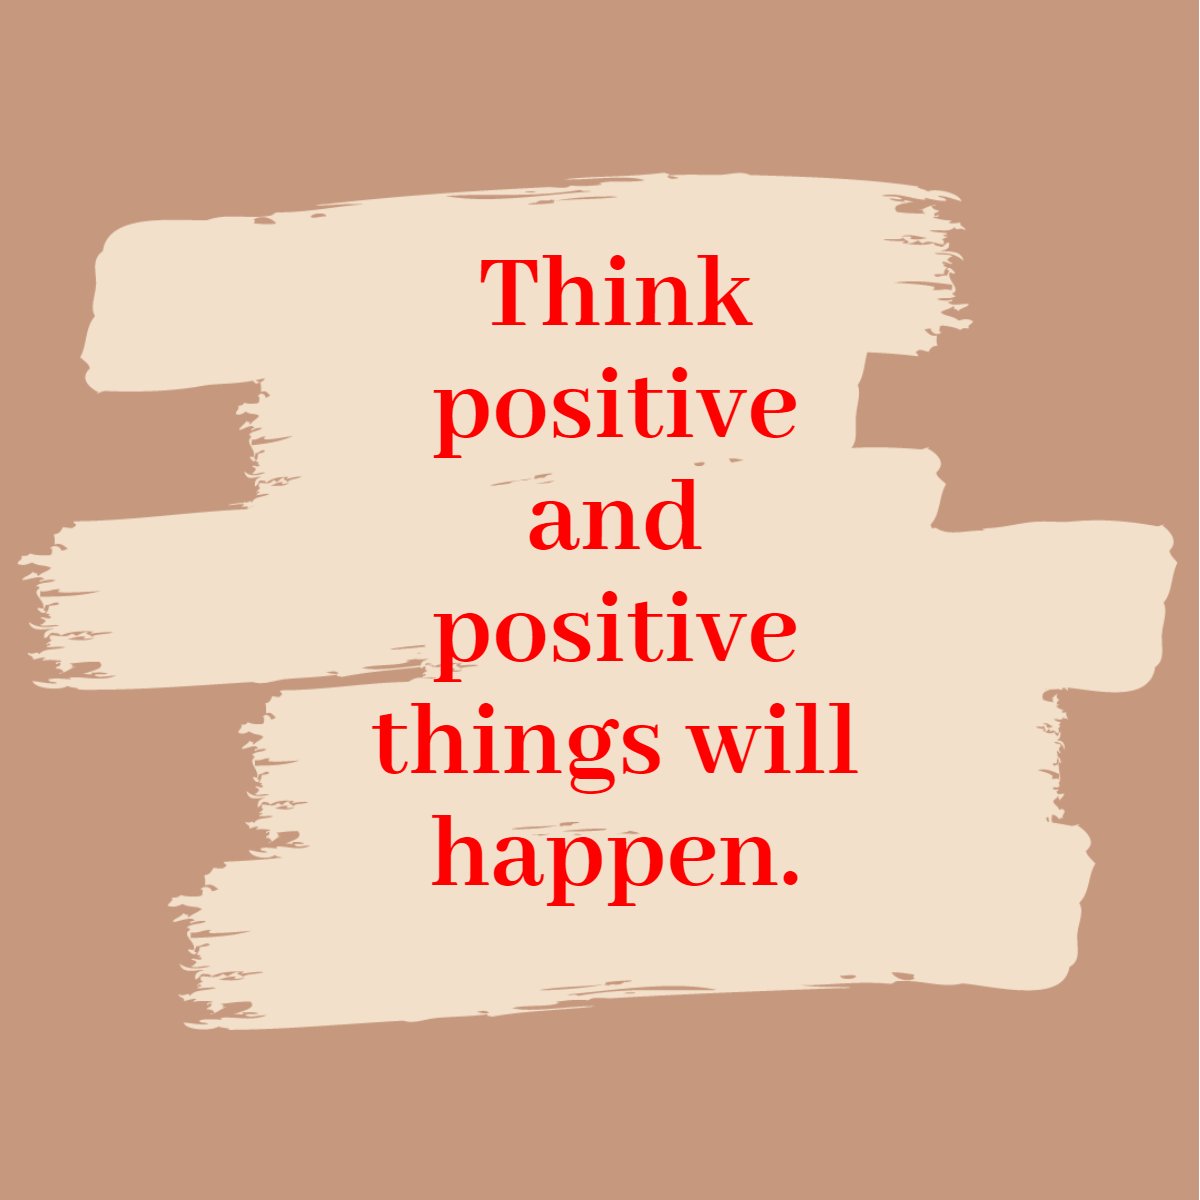 Matt Kemp - When you think positive, good things happen.

#positivethoughts    #positivethoughtsonly    #lawofpositivism    #positivism    #positiveaffirmationsthoughts
#realestate #homeforsale #housegoals #househunting #minnesotarealestate #twincitiesrealestate